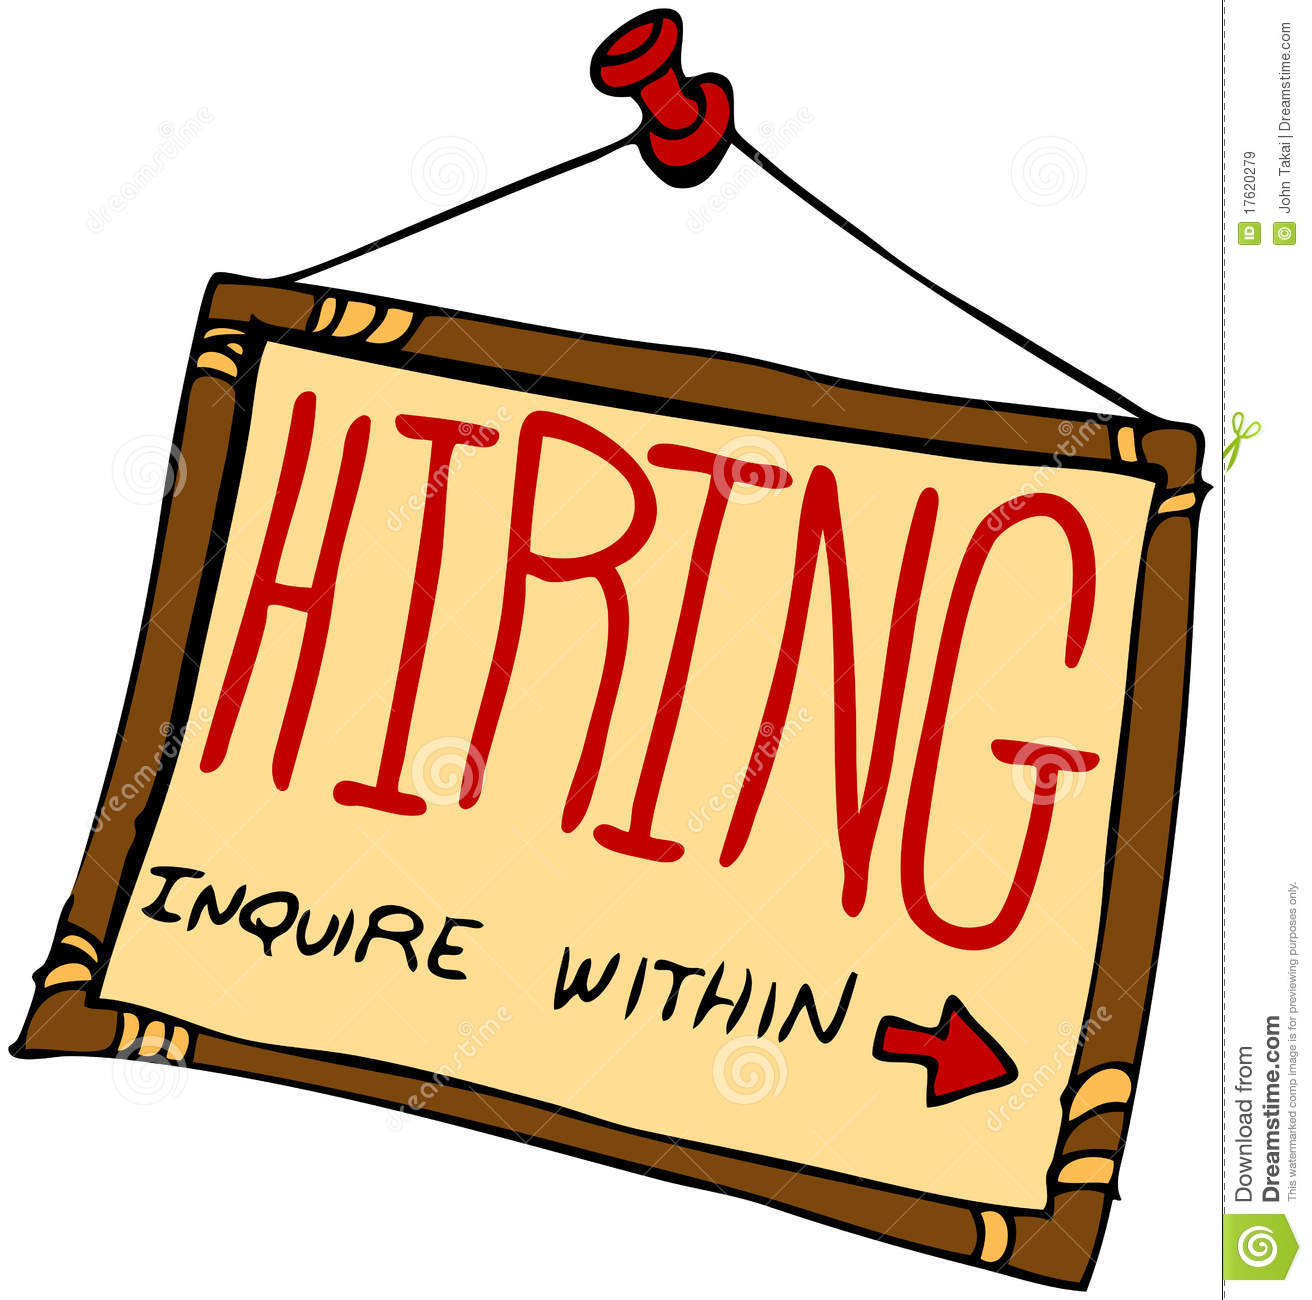 Hiring Sign Royalty Free Stock Images   Image  17620279